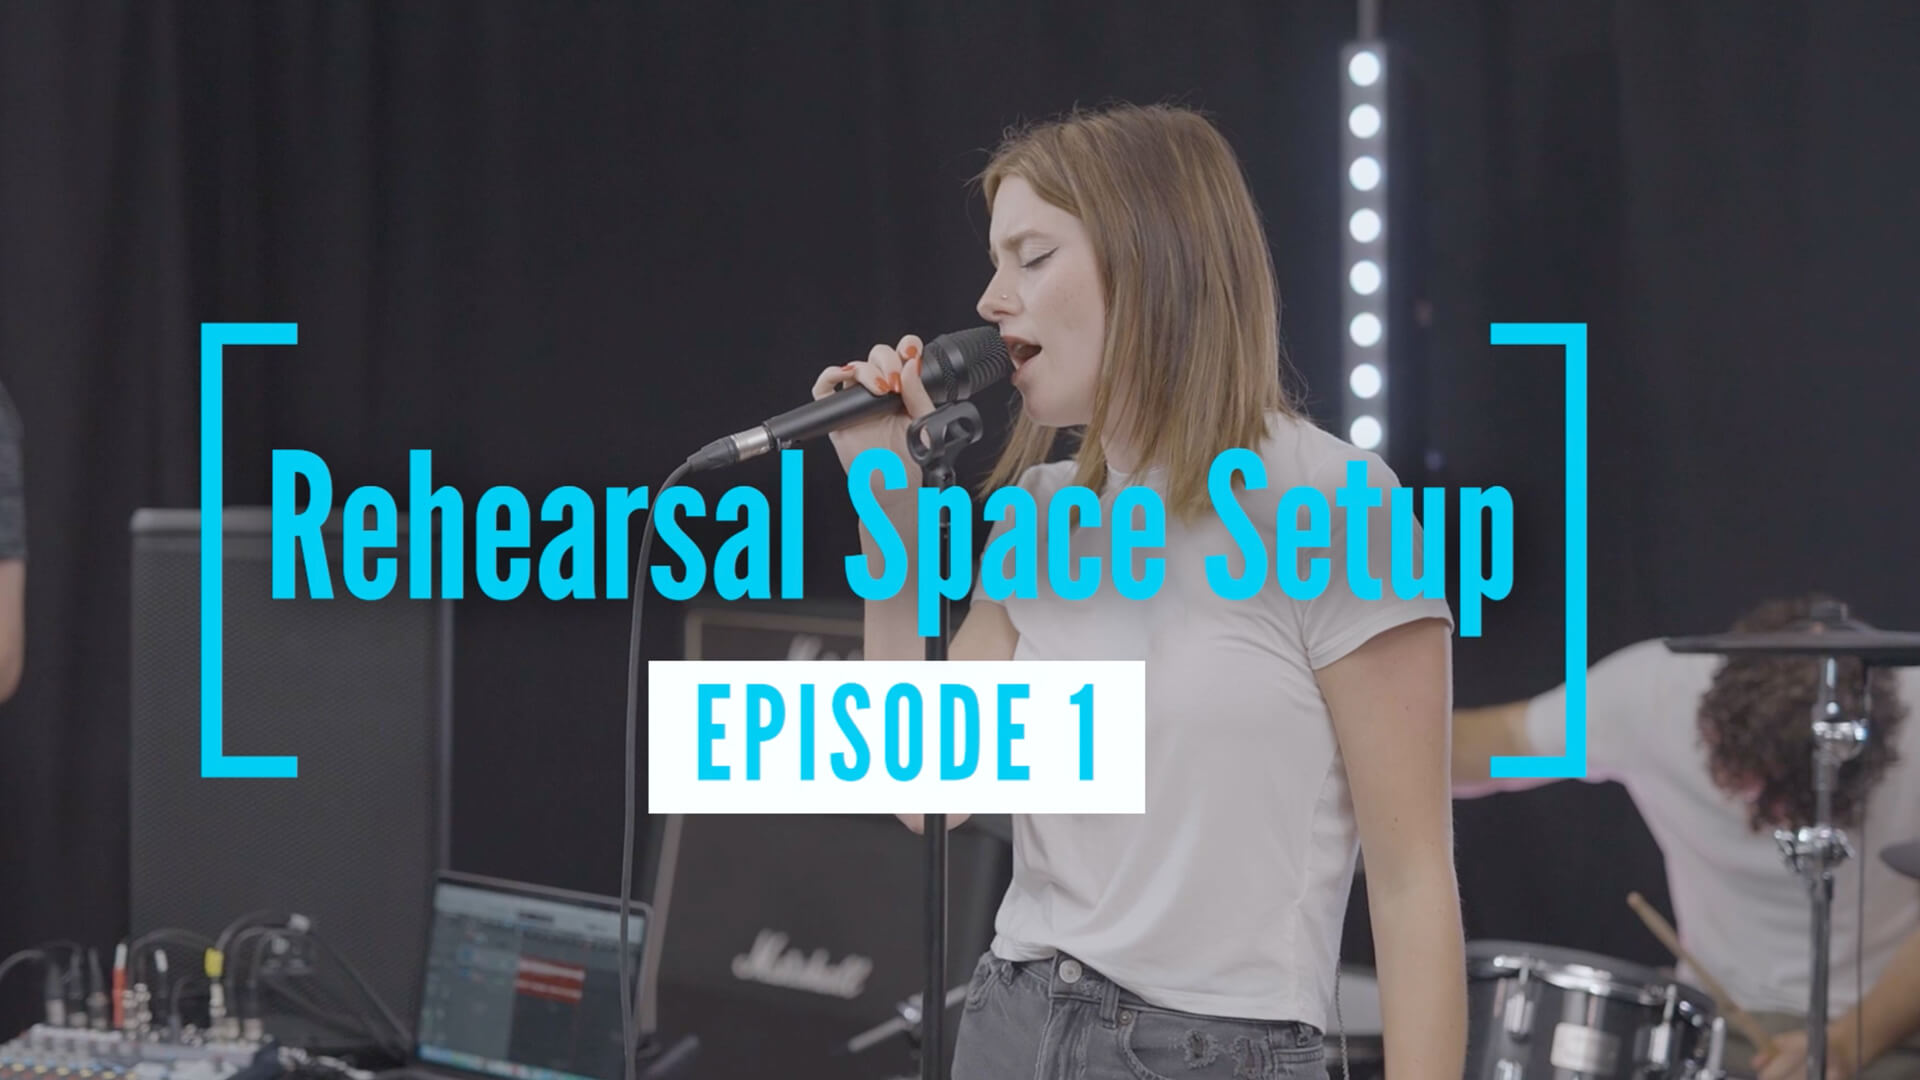 VIDEO: How to Set Up Your Rehearsal Space with JBL, AKG + Soundcraft